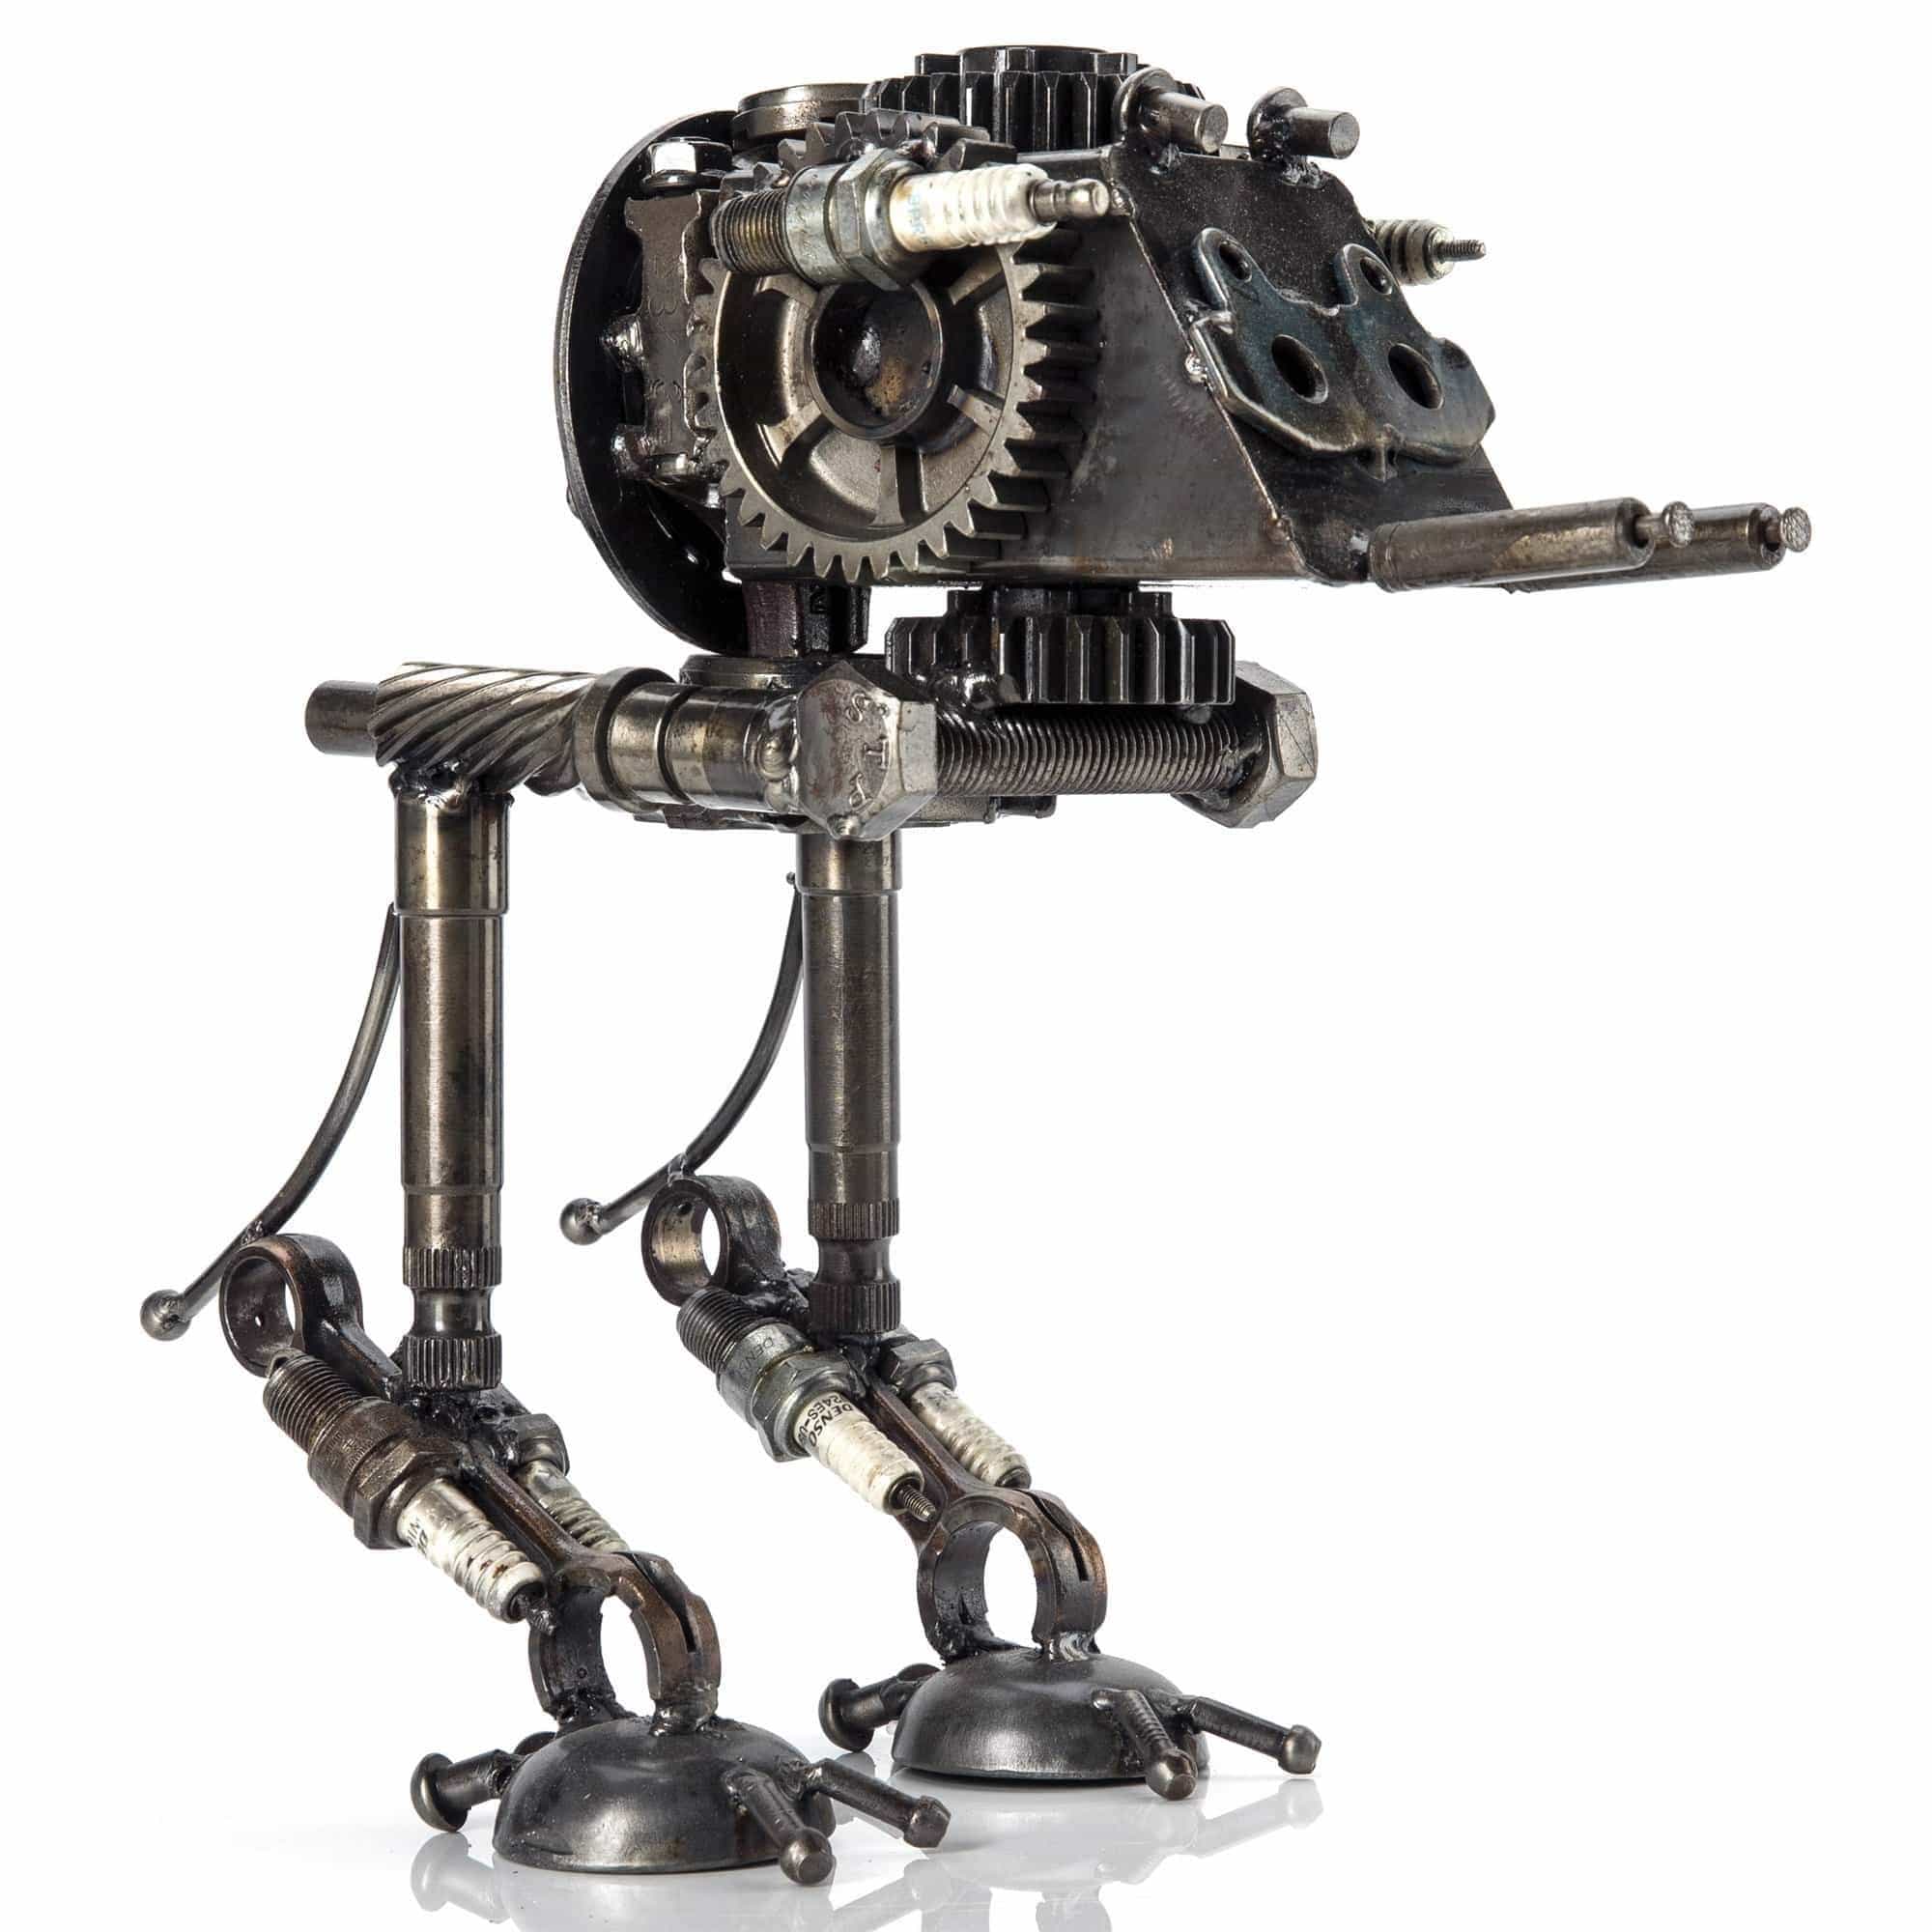 Kalifano Recycled Metal Art AT-ST Inspired Recycled Metal Sculpture RMS-1300ATST-N